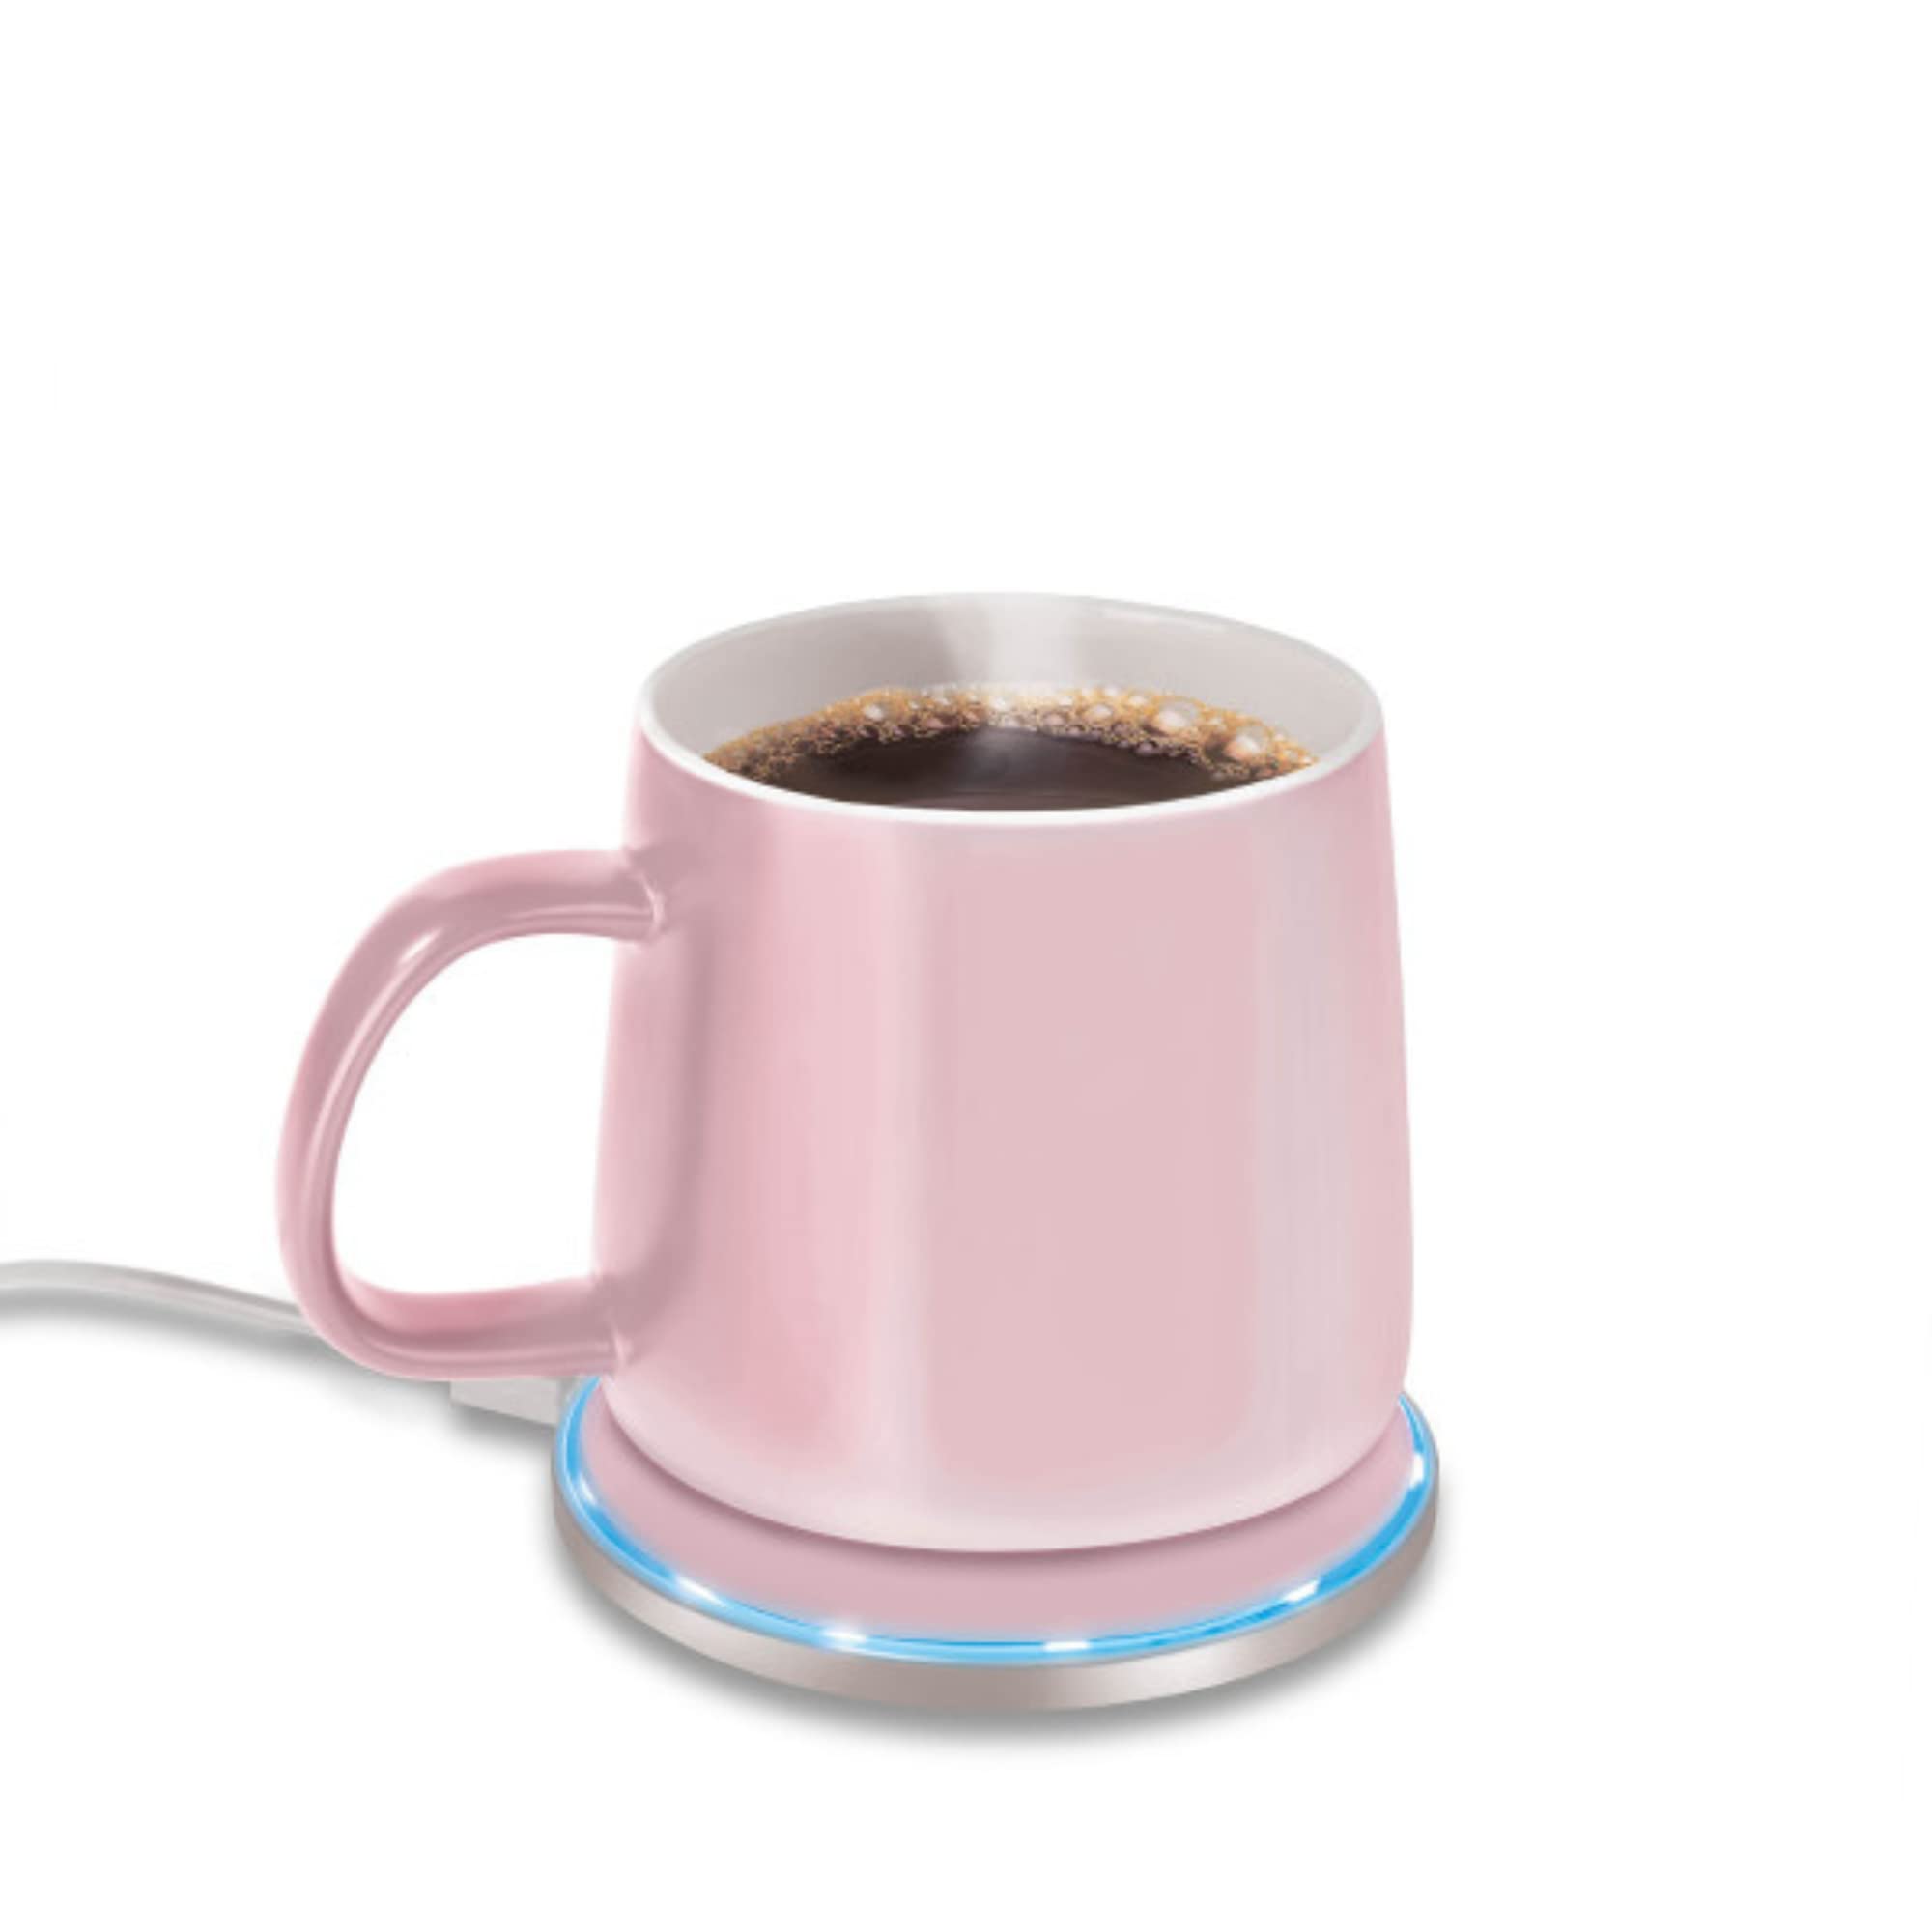 Lomi 2 in 1 Smart Mug Warmer and Qi Wireless Charger